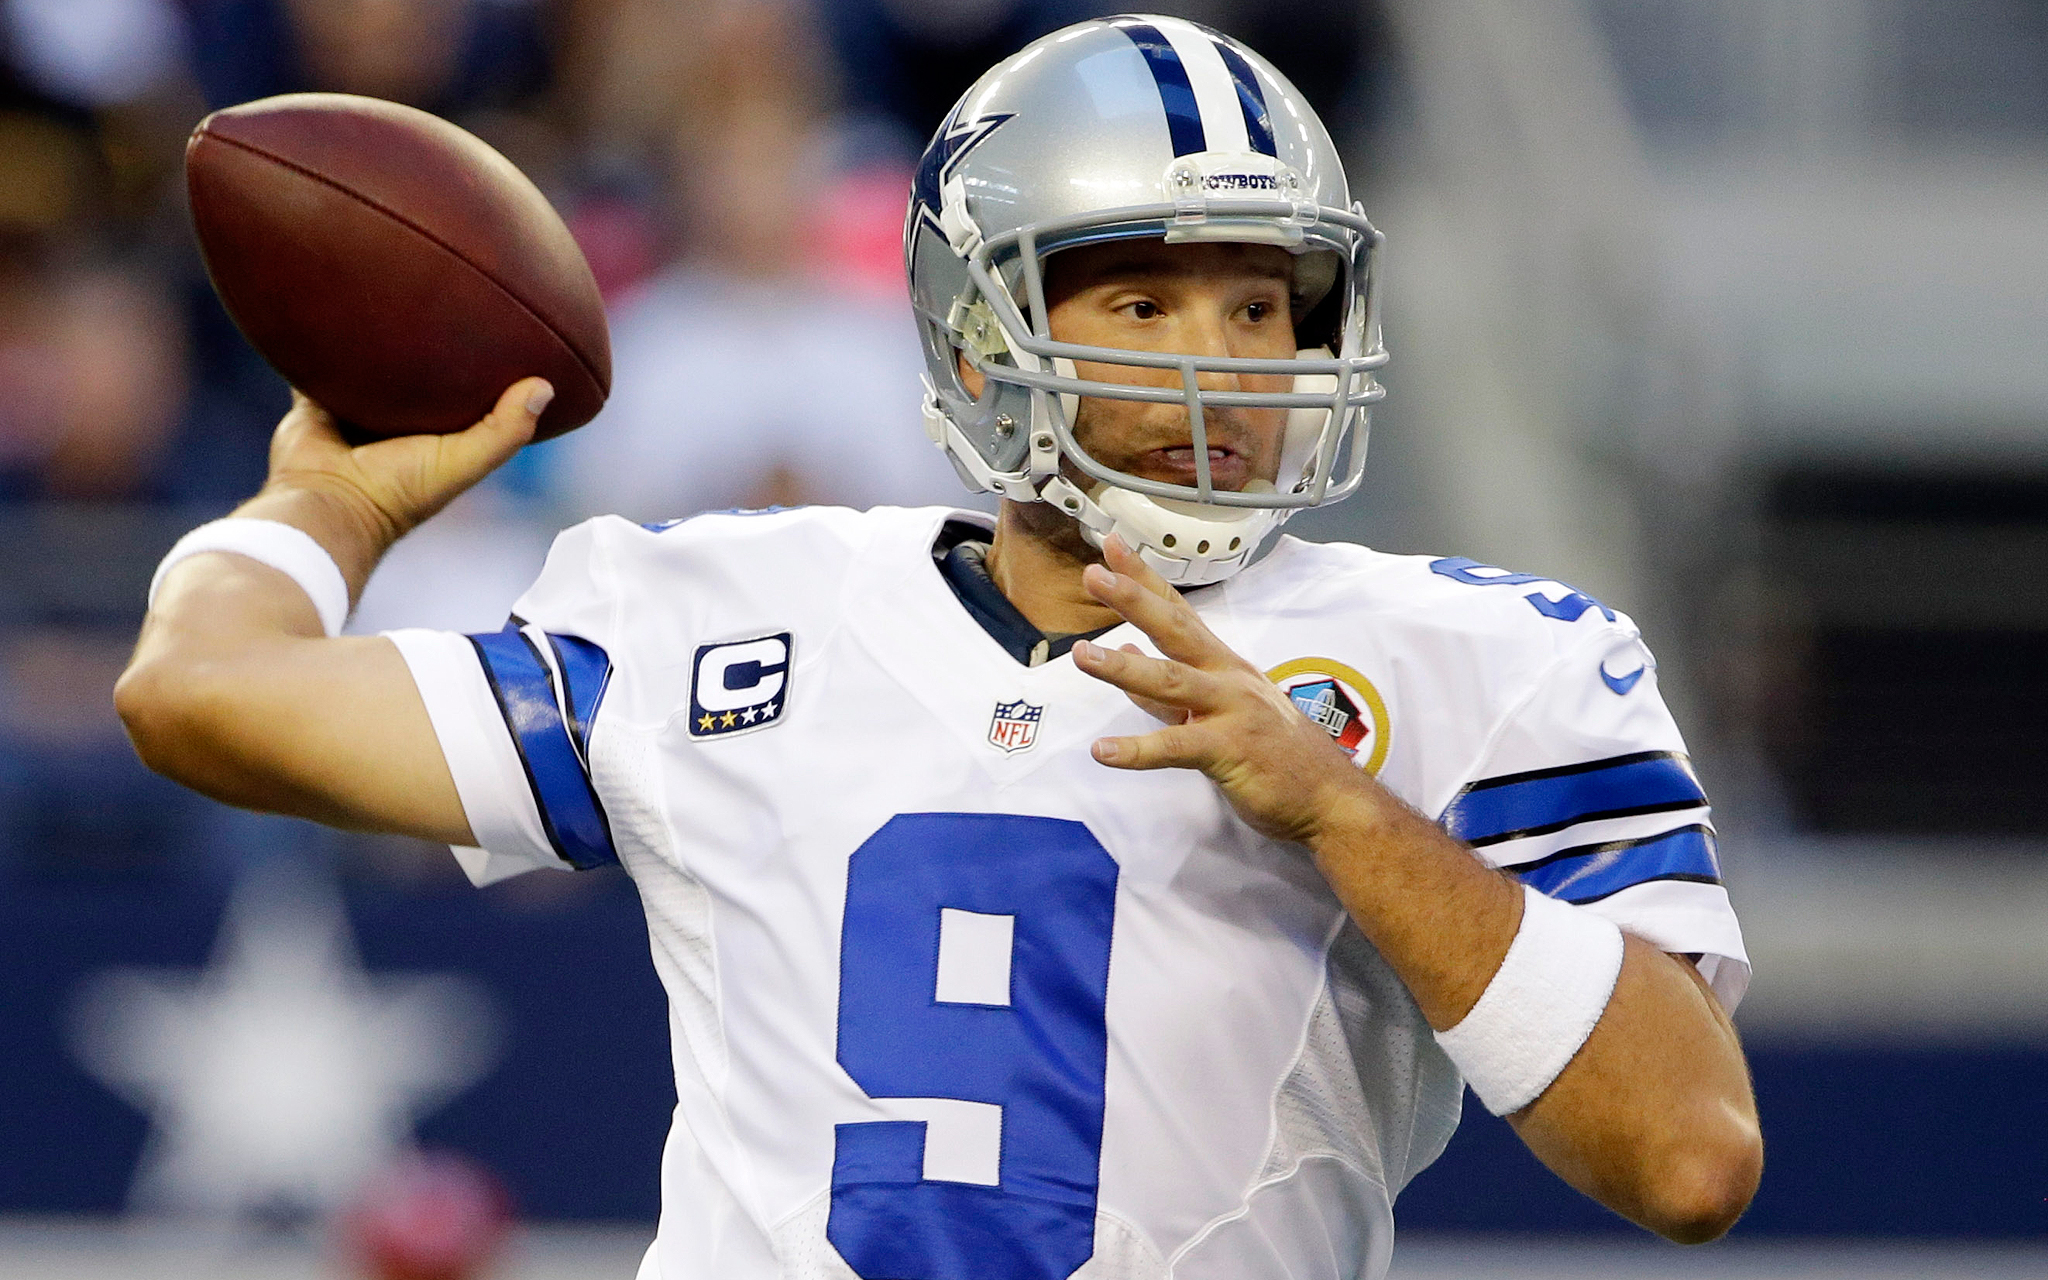 Tony Romo Cowboys HD Image 2048x1280 for Gadget Background 40530